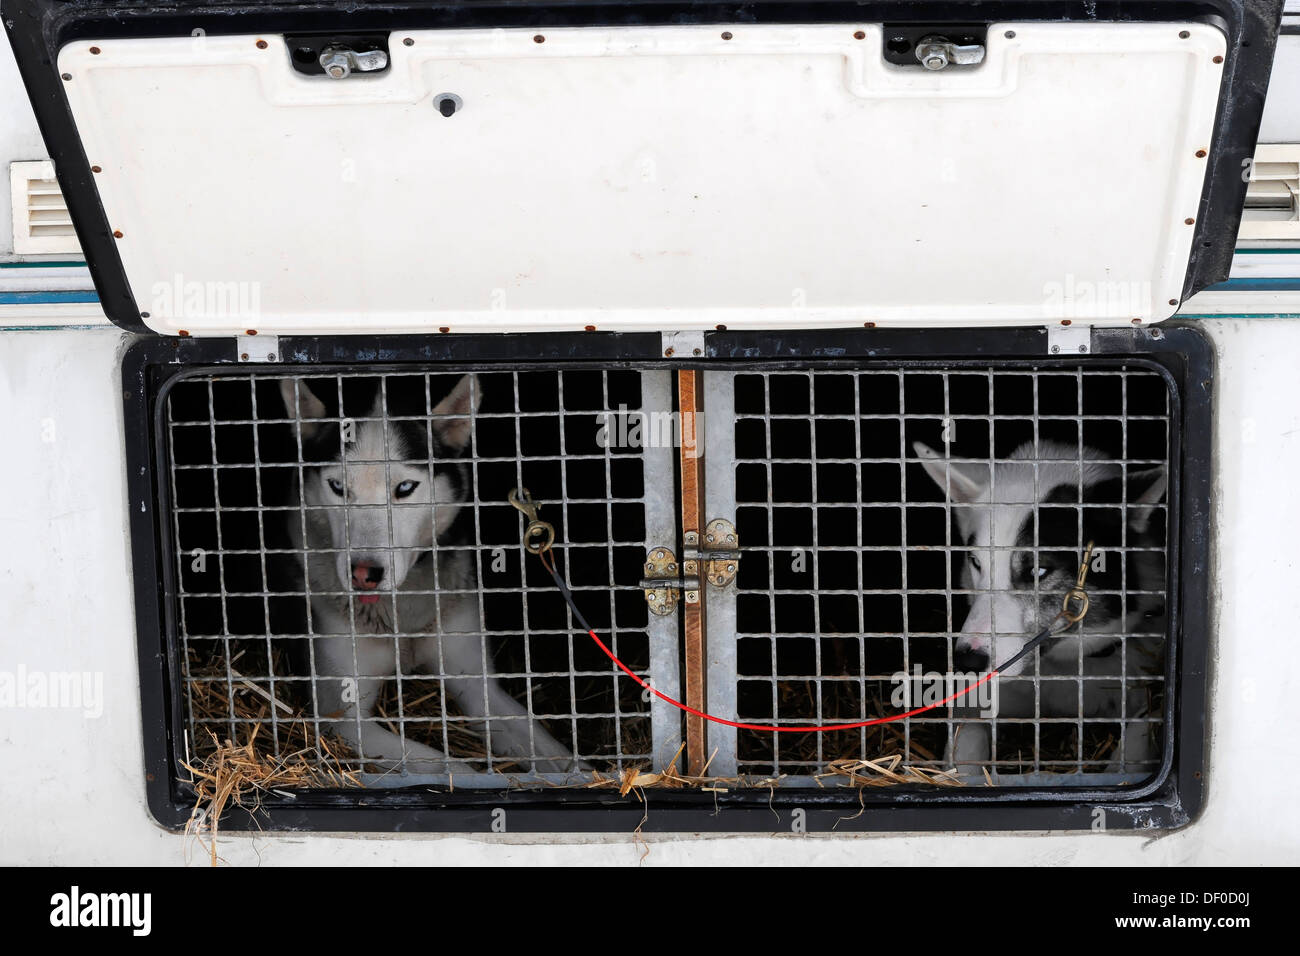 Siberian Huskies behind bars in a transport vehicle, 6th International Sled Dog Race, 26-27/01/2013, Inzell, Bavaria, Germany Stock Photo